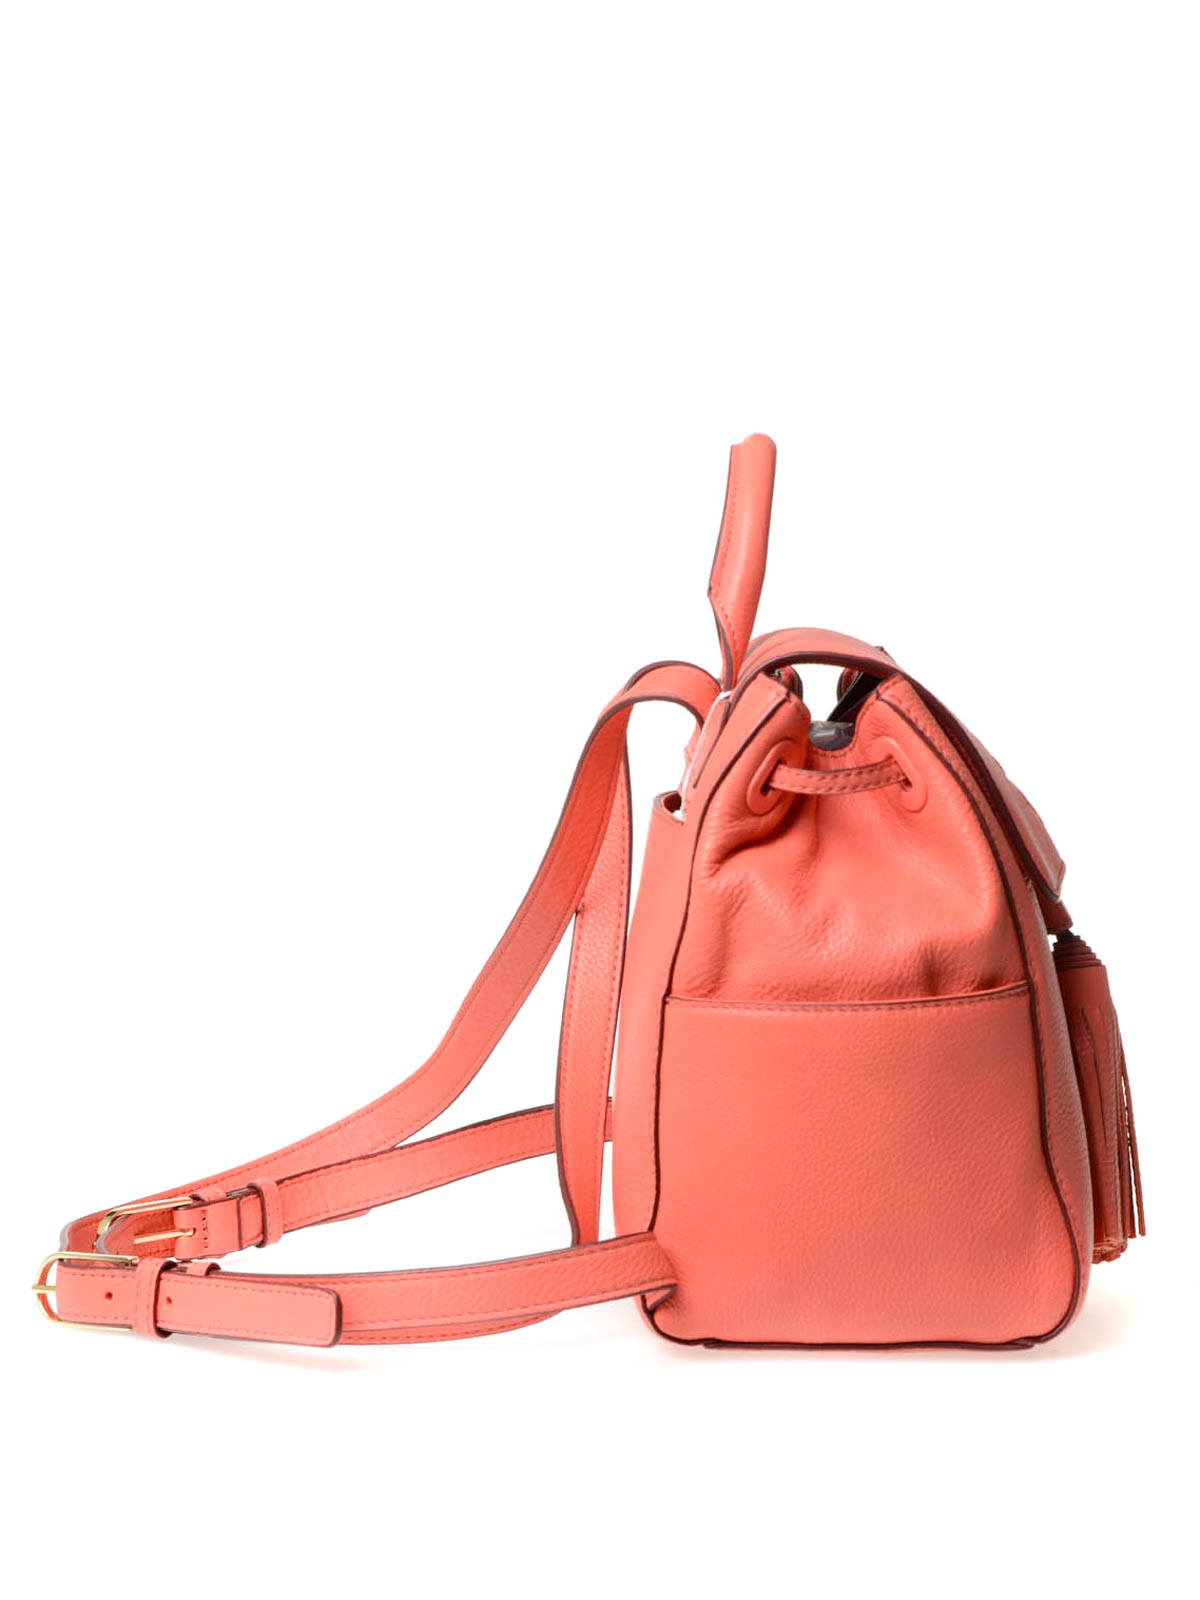 Backpacks Tory Burch - Thea backpack - 11169719656 | Shop online at iKRIX